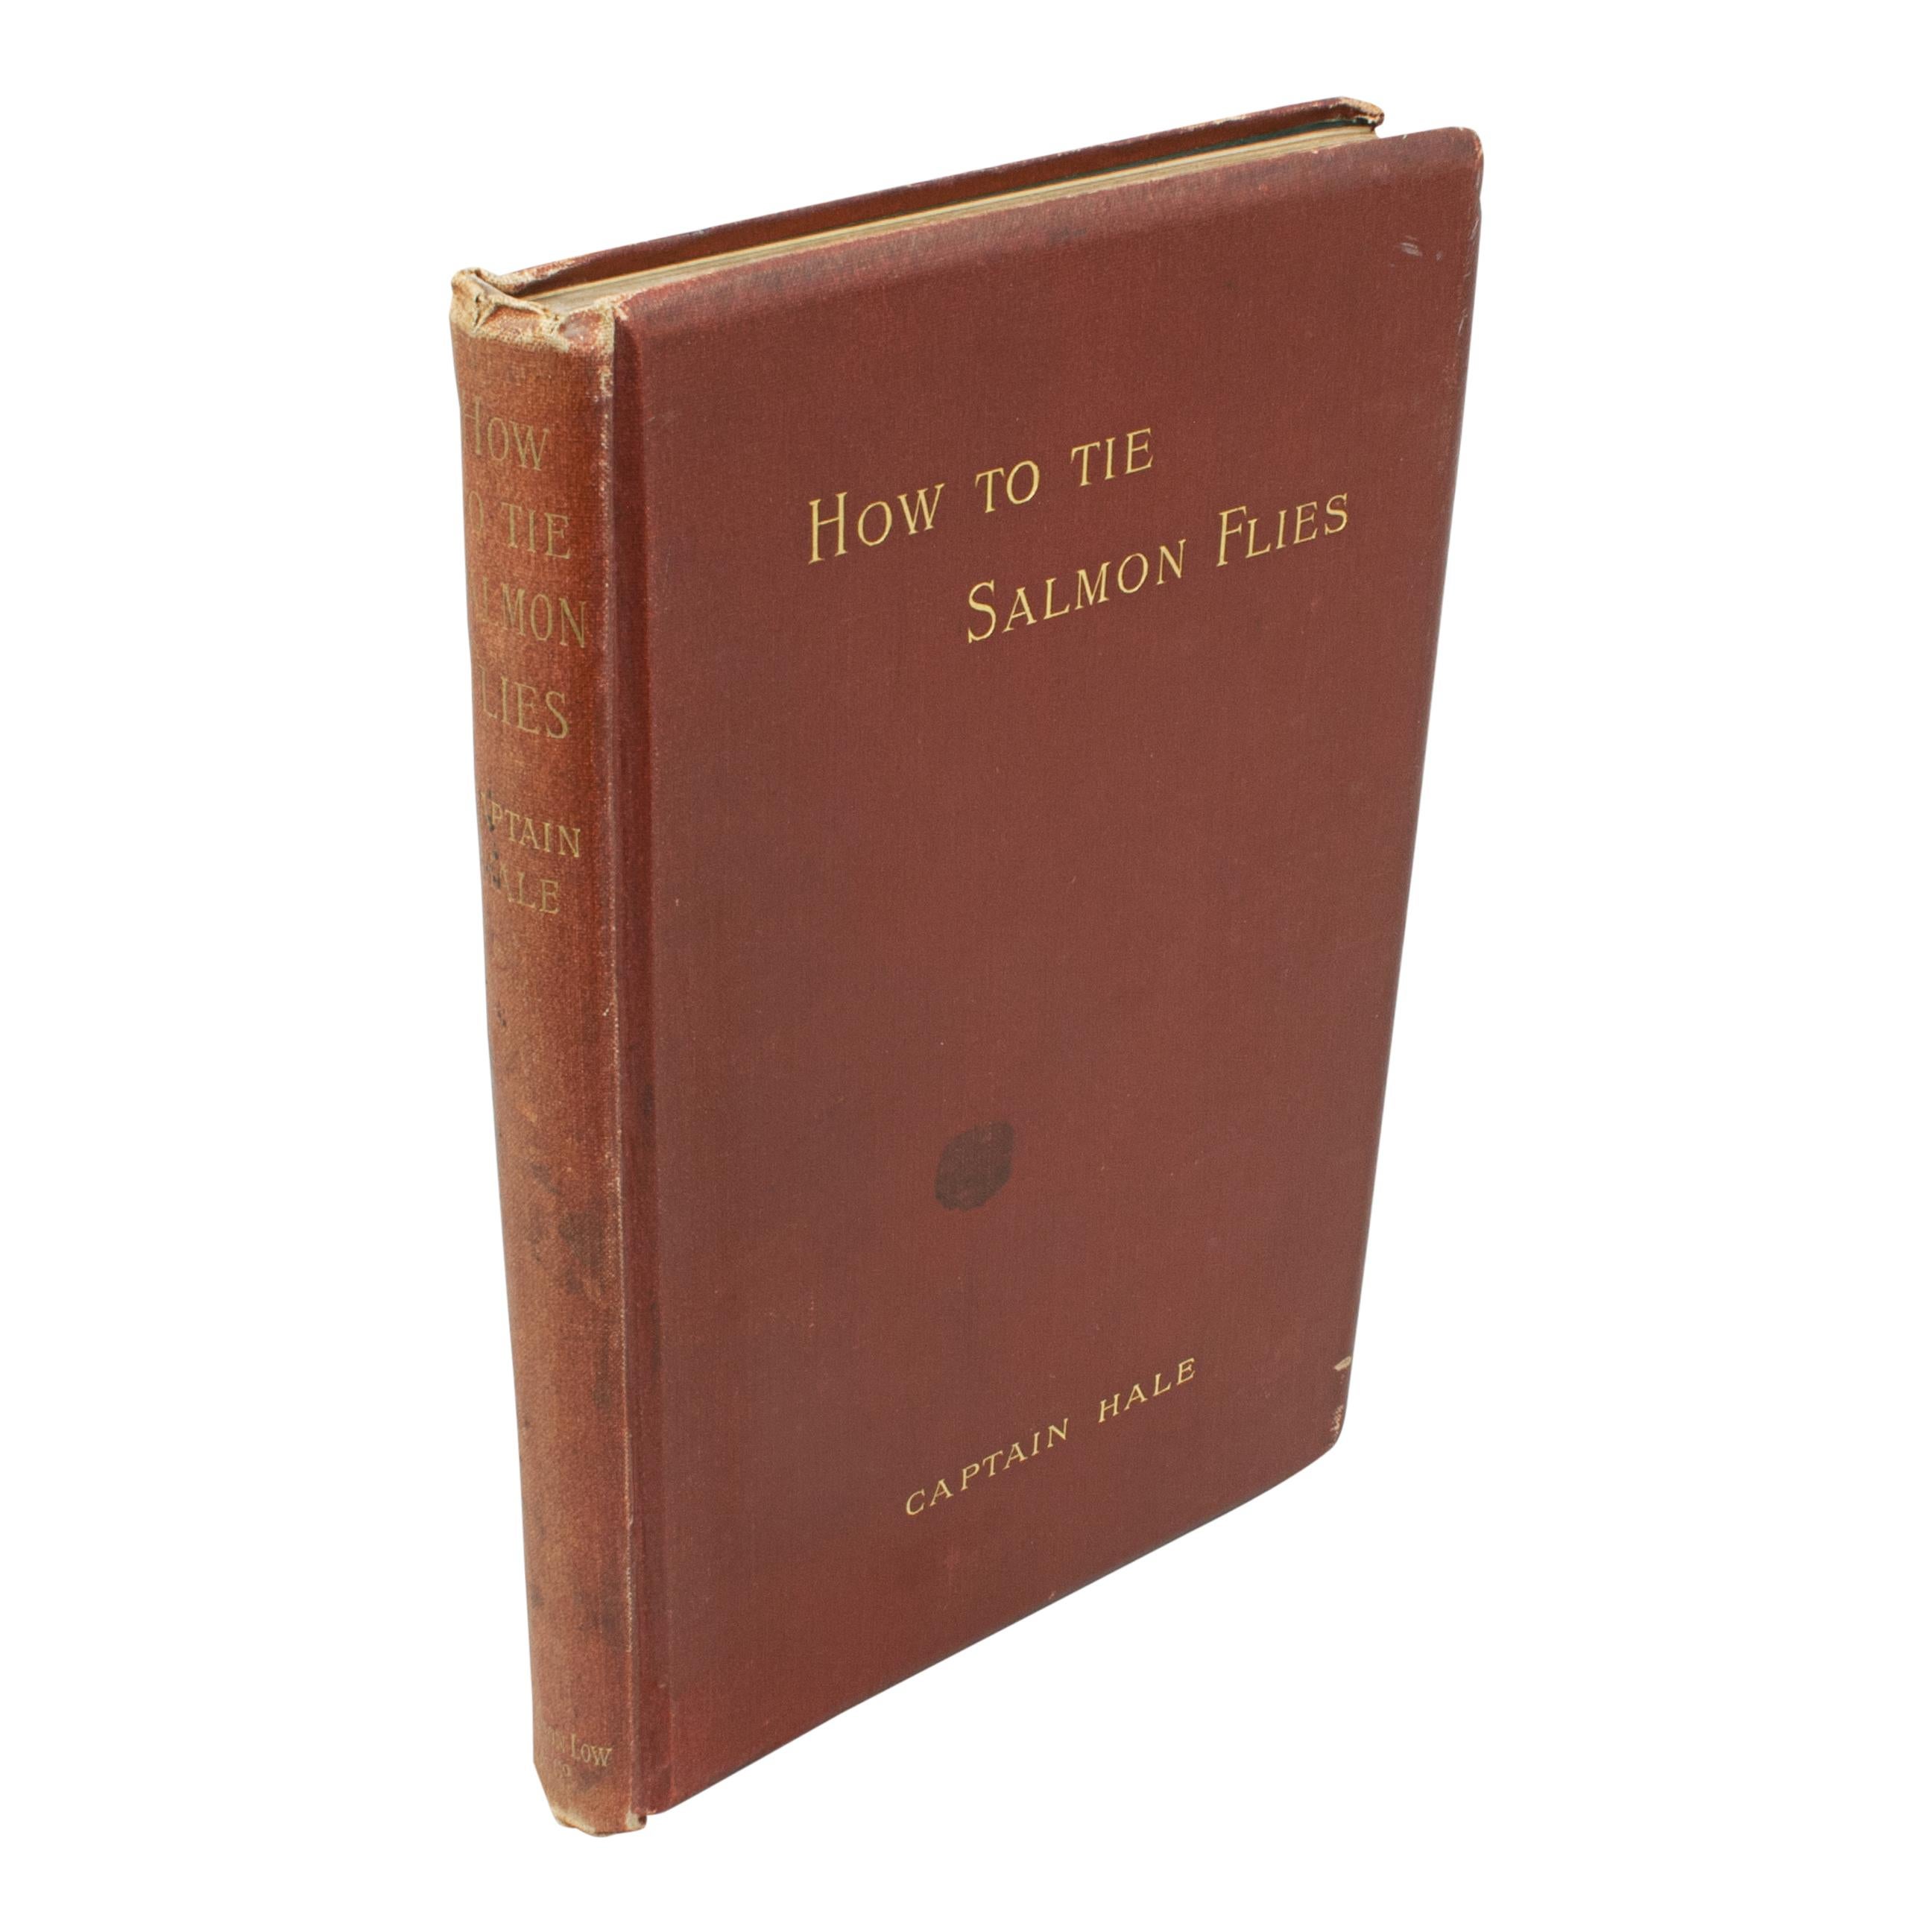 A good 1st edition angling book by Captain Hale of the East Lancashire Regiment entitled 'How to Tie Salmon Flies'. This is a hard back copy with original red cloth binding with gilt lettering to the front board and spine. Title page printed in red